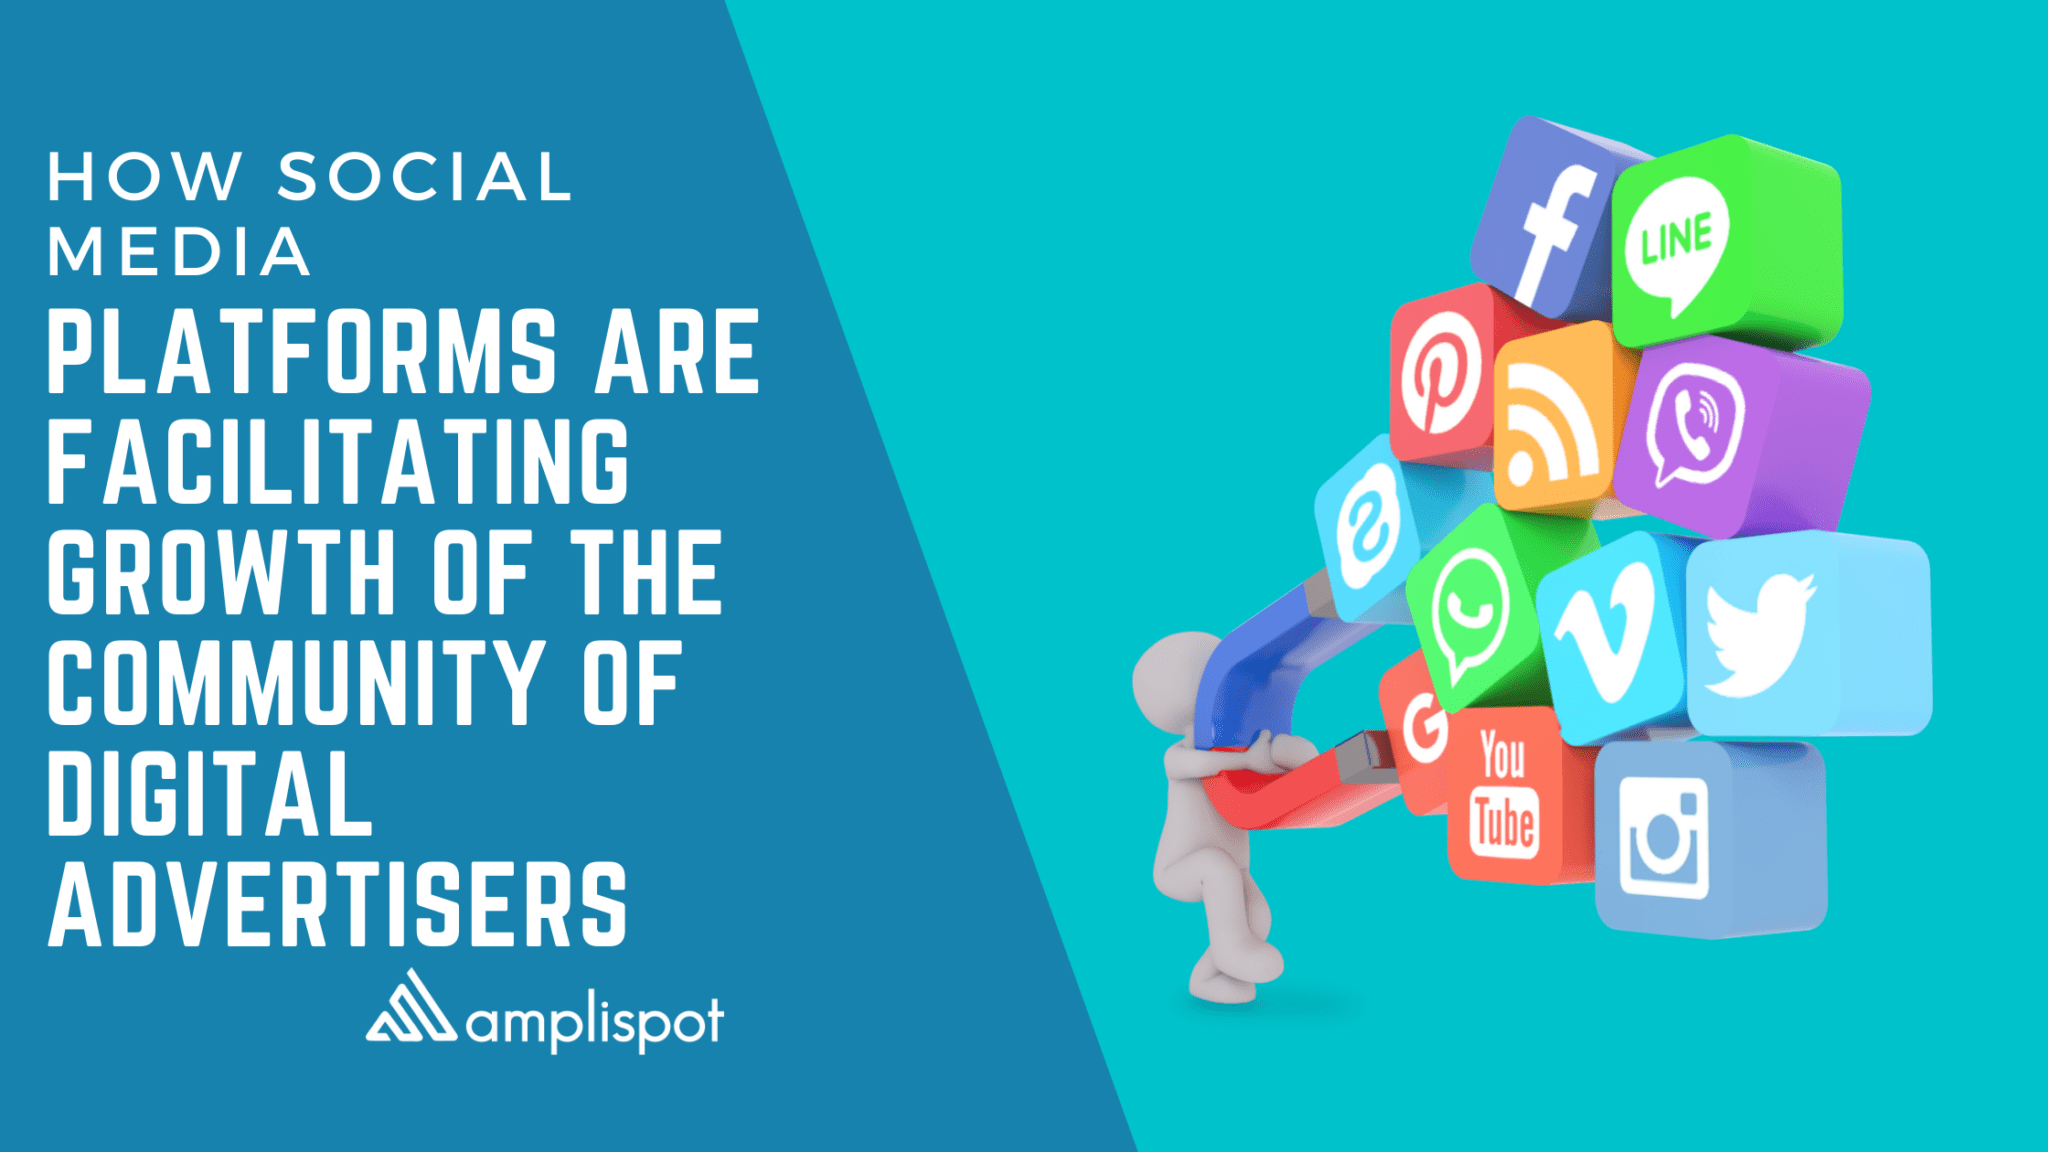 How Social Media Platforms are Facilitating Growth of the Community of Digital Advertisers